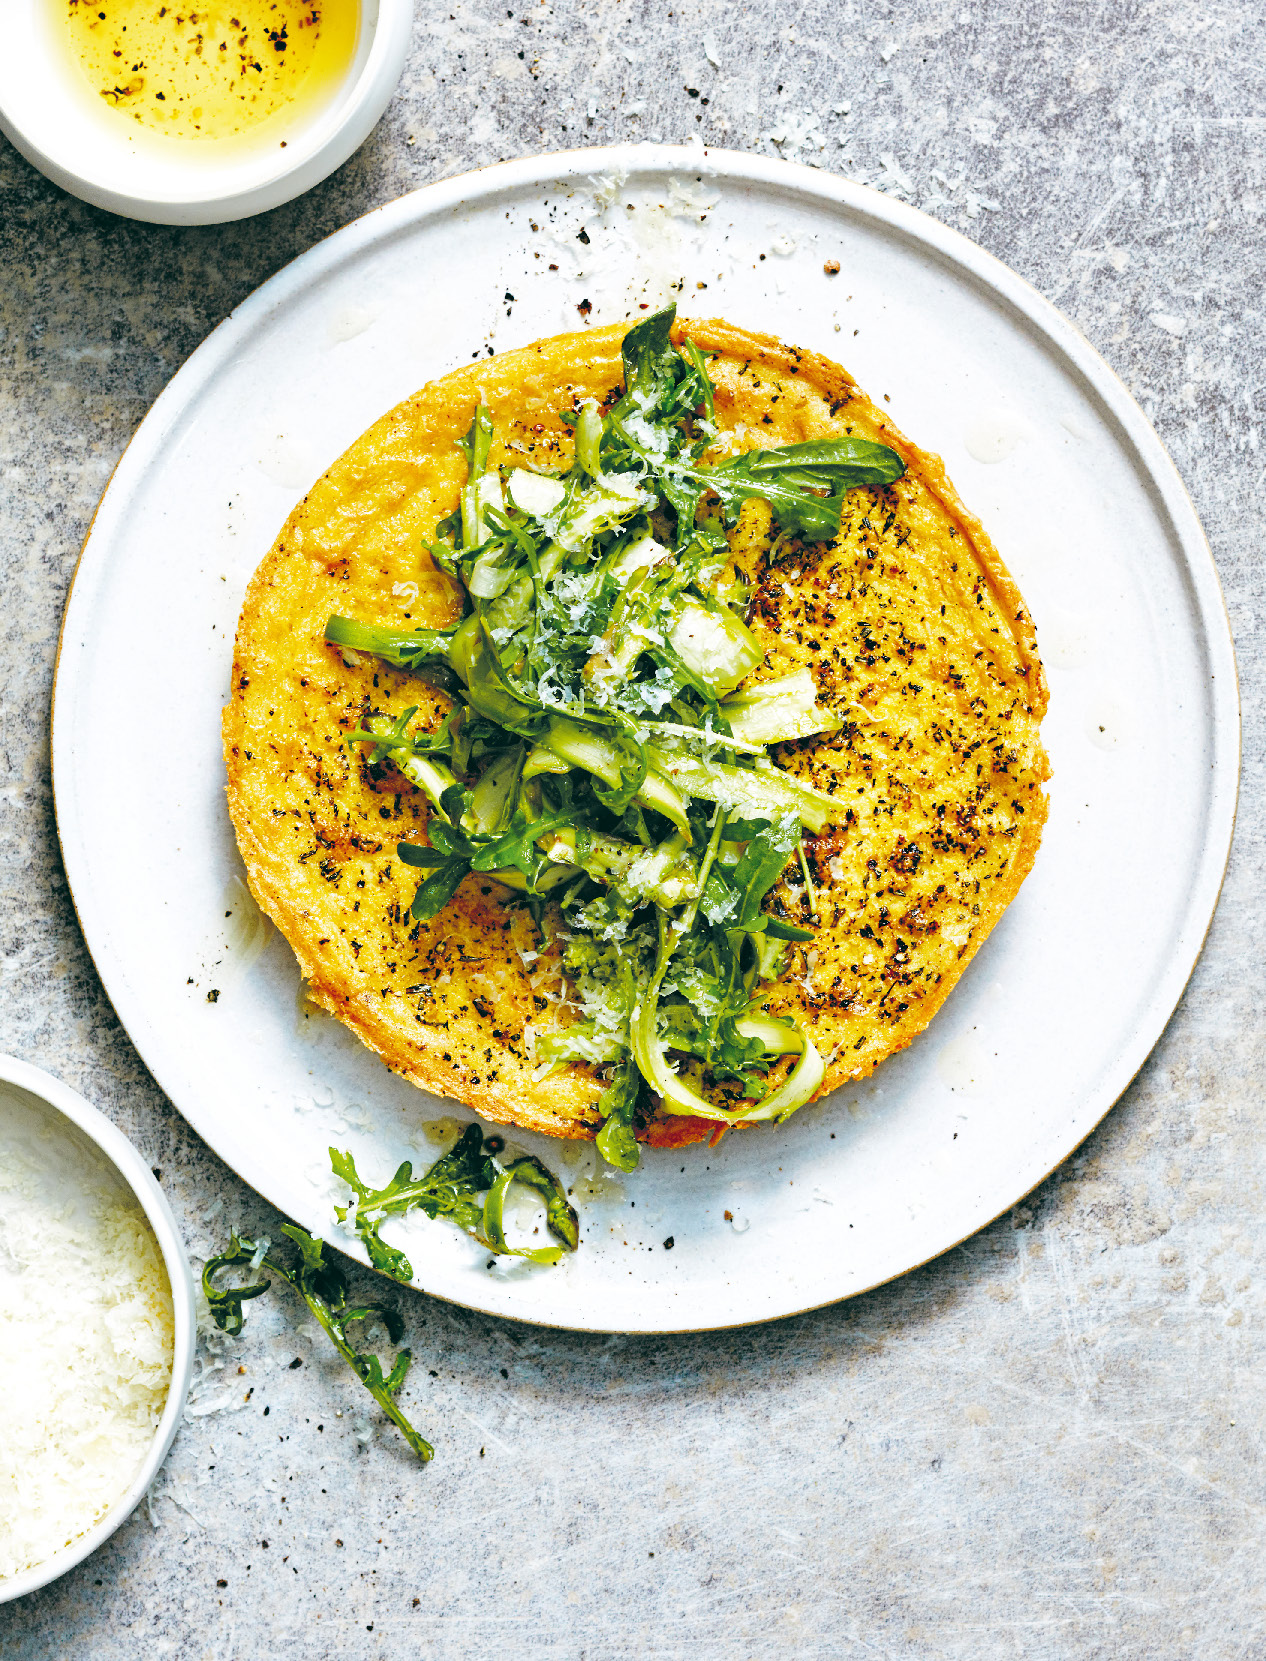 Chickpea pancake with mache, asparagus and manchego